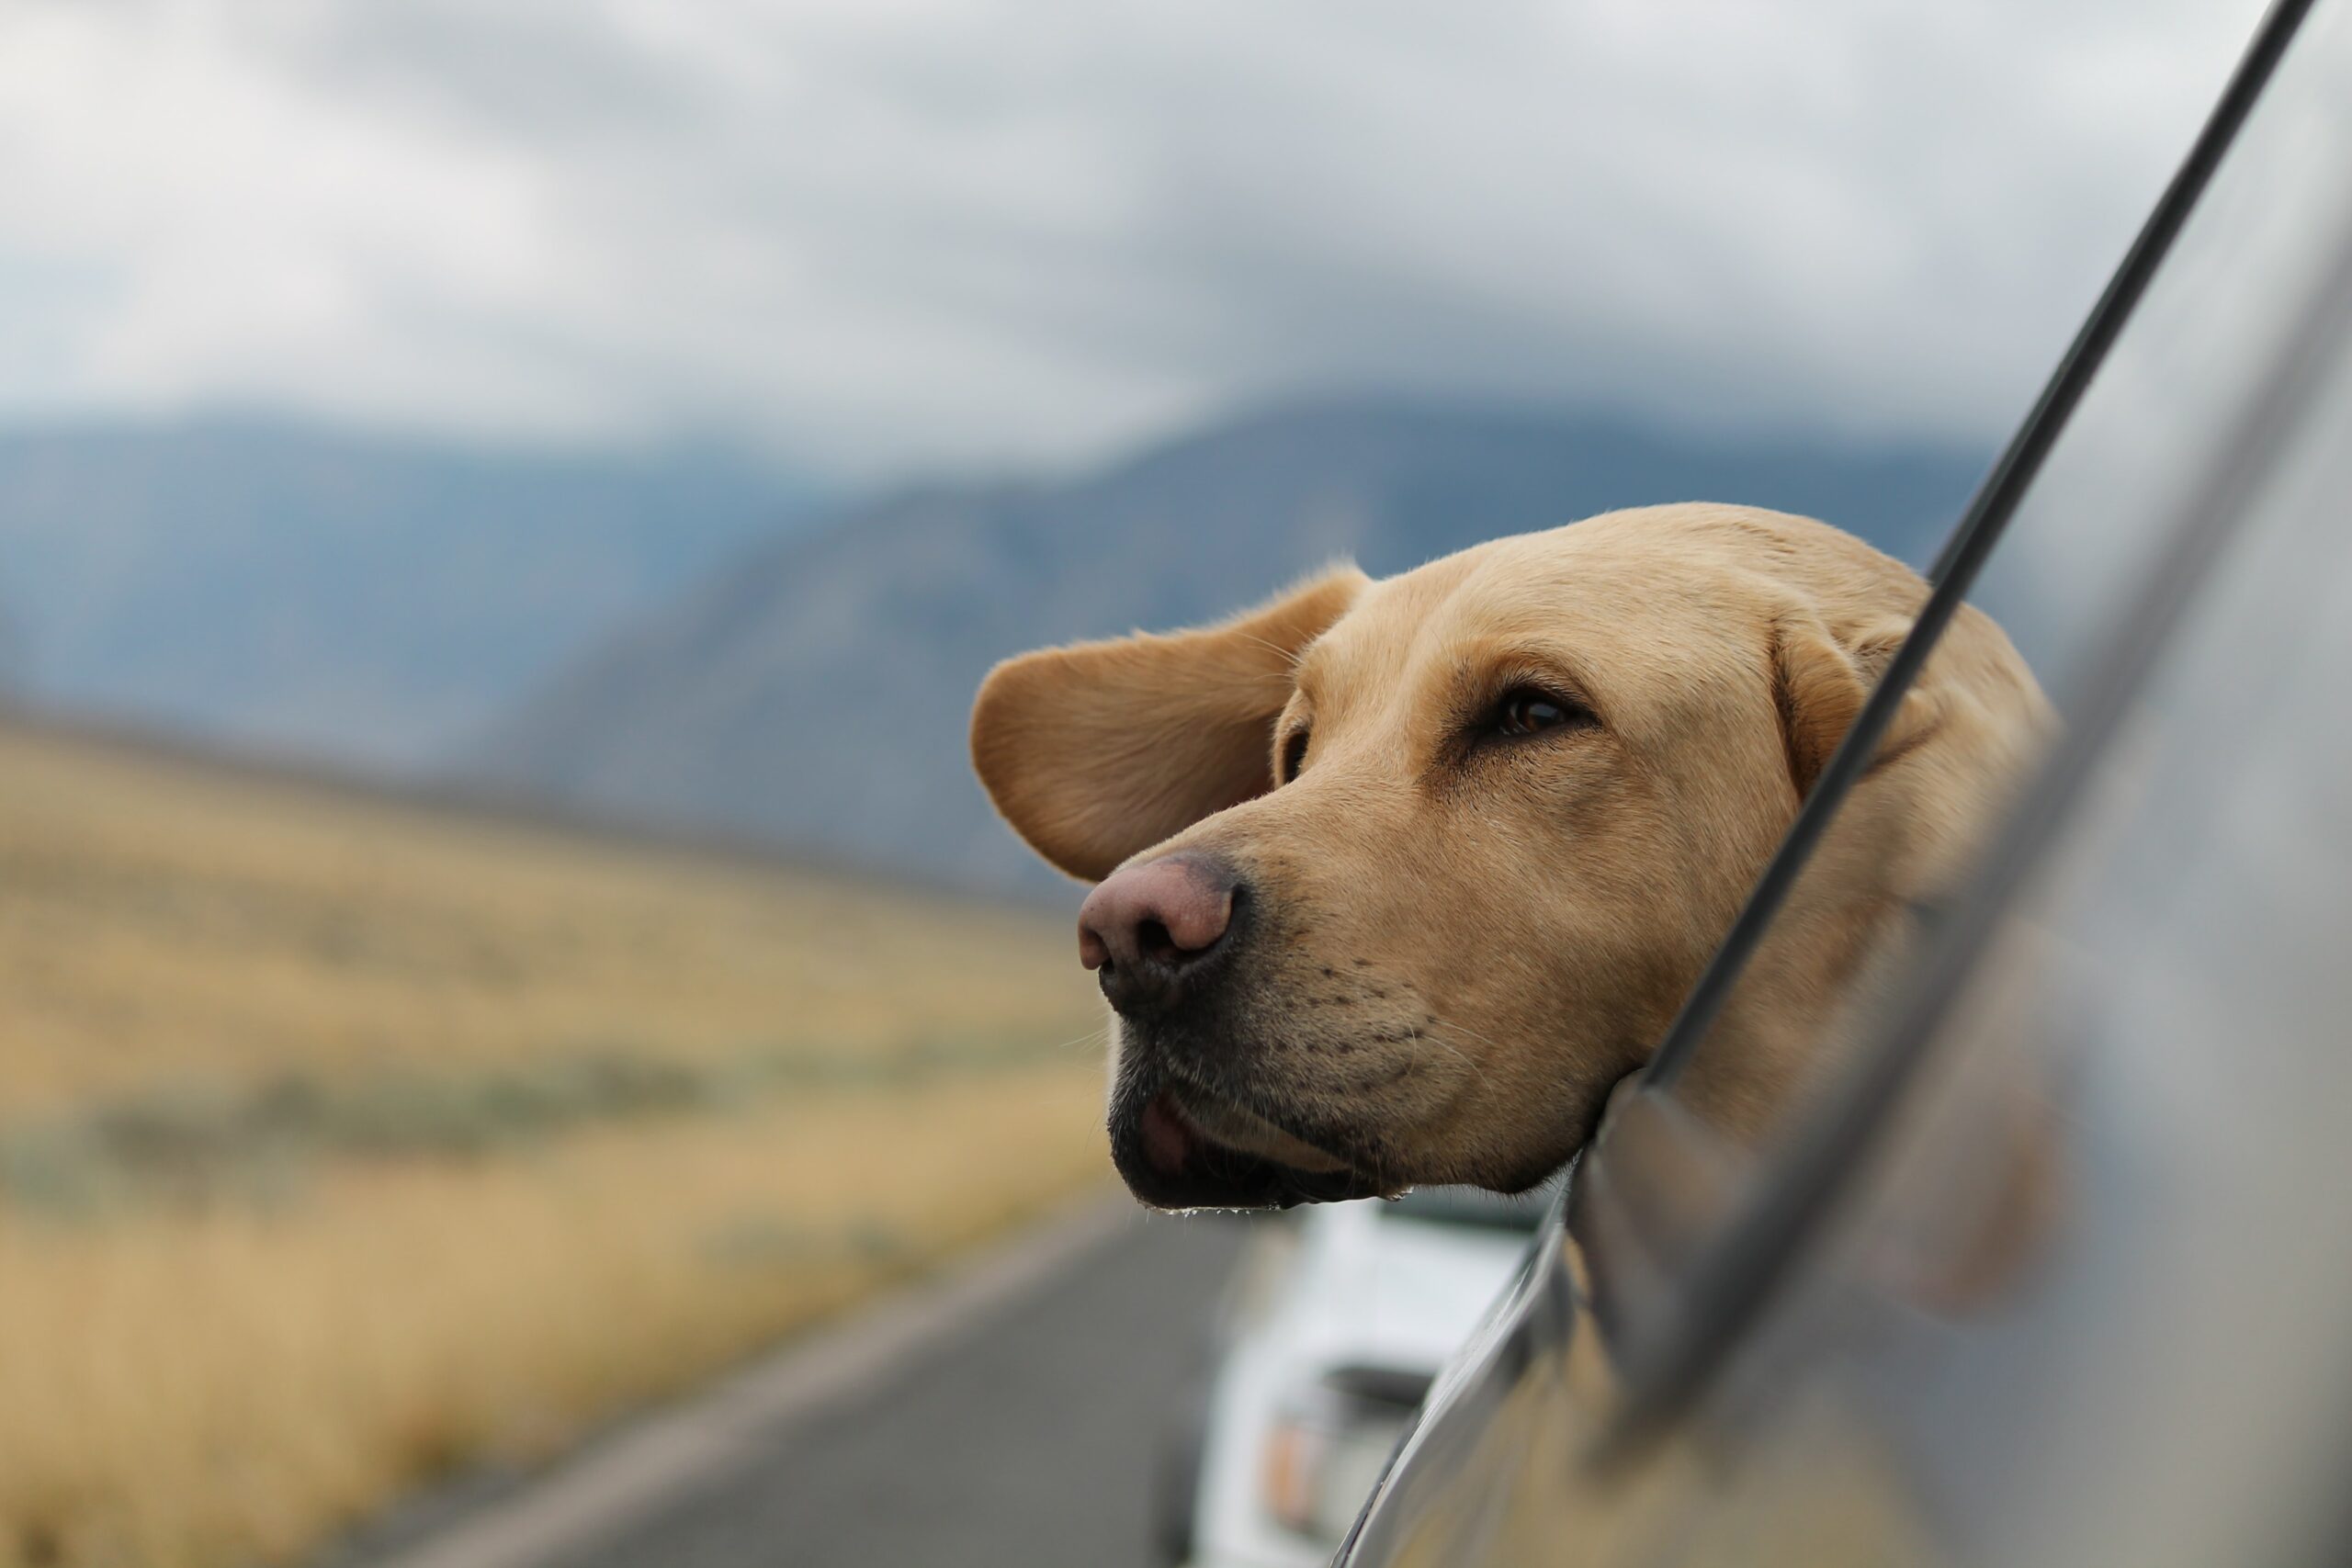 How To Prepare for a Safe Road Trip With Your Dogs